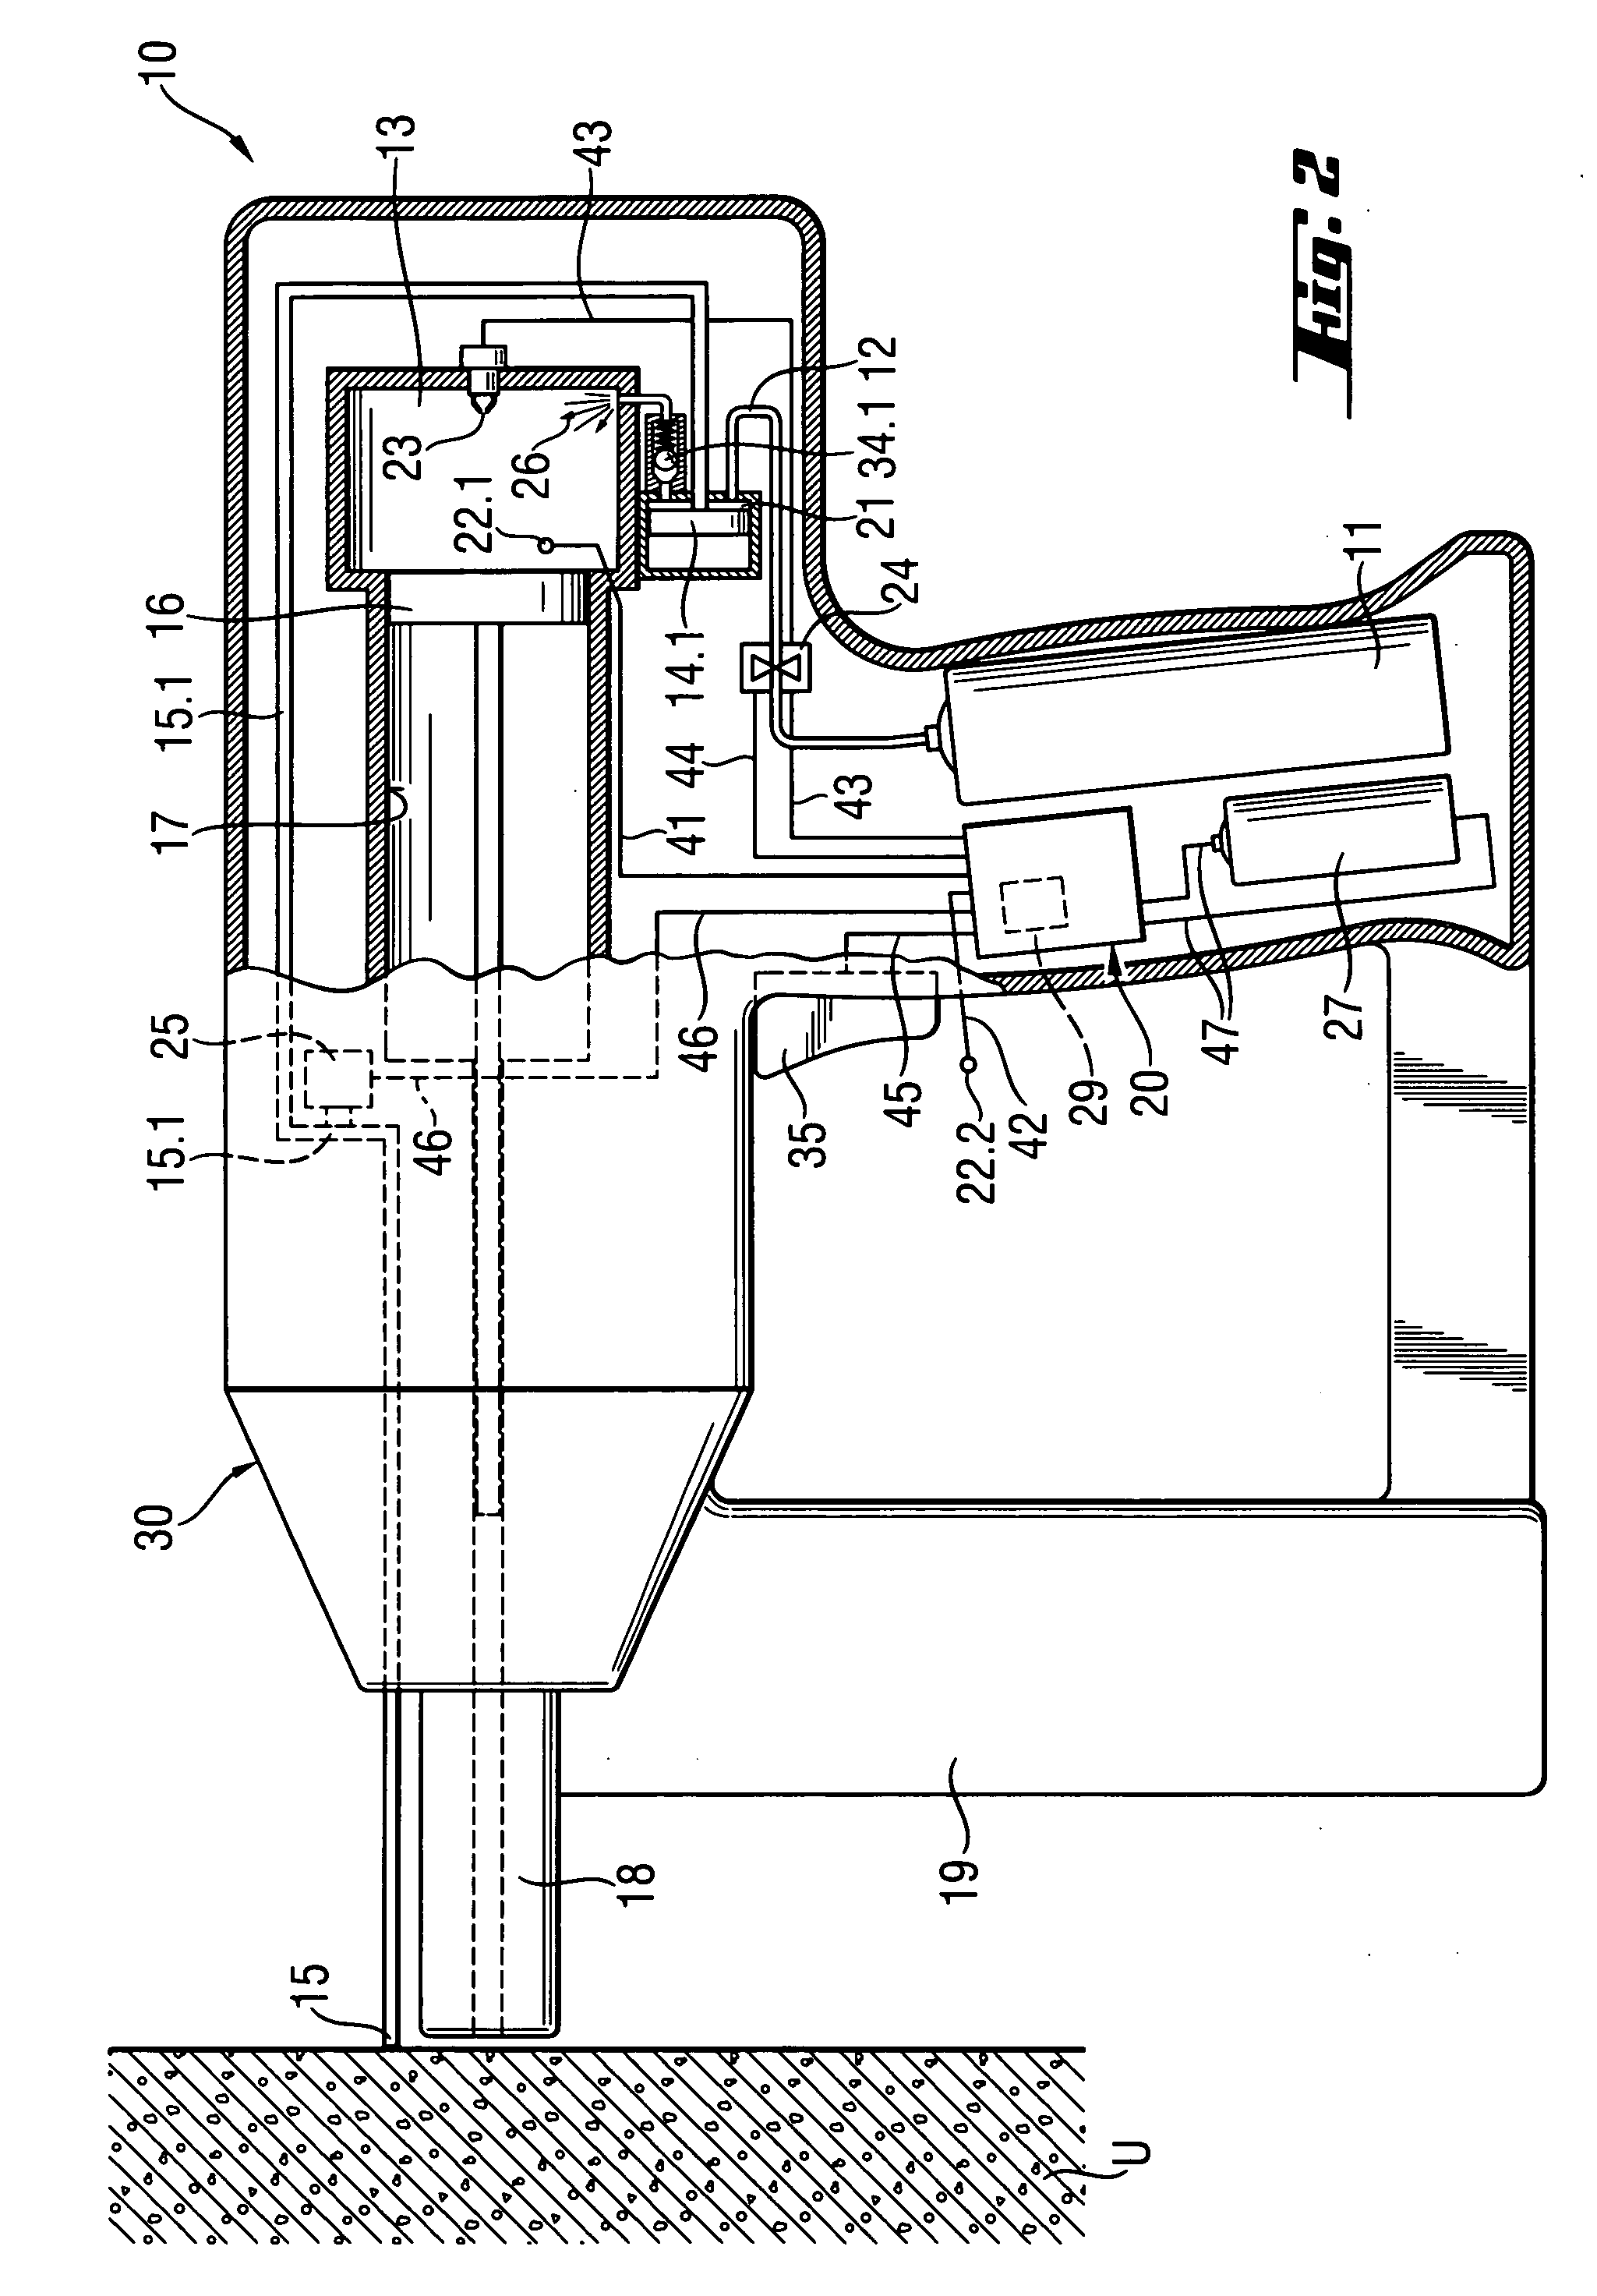 Combustion-engined setting tool